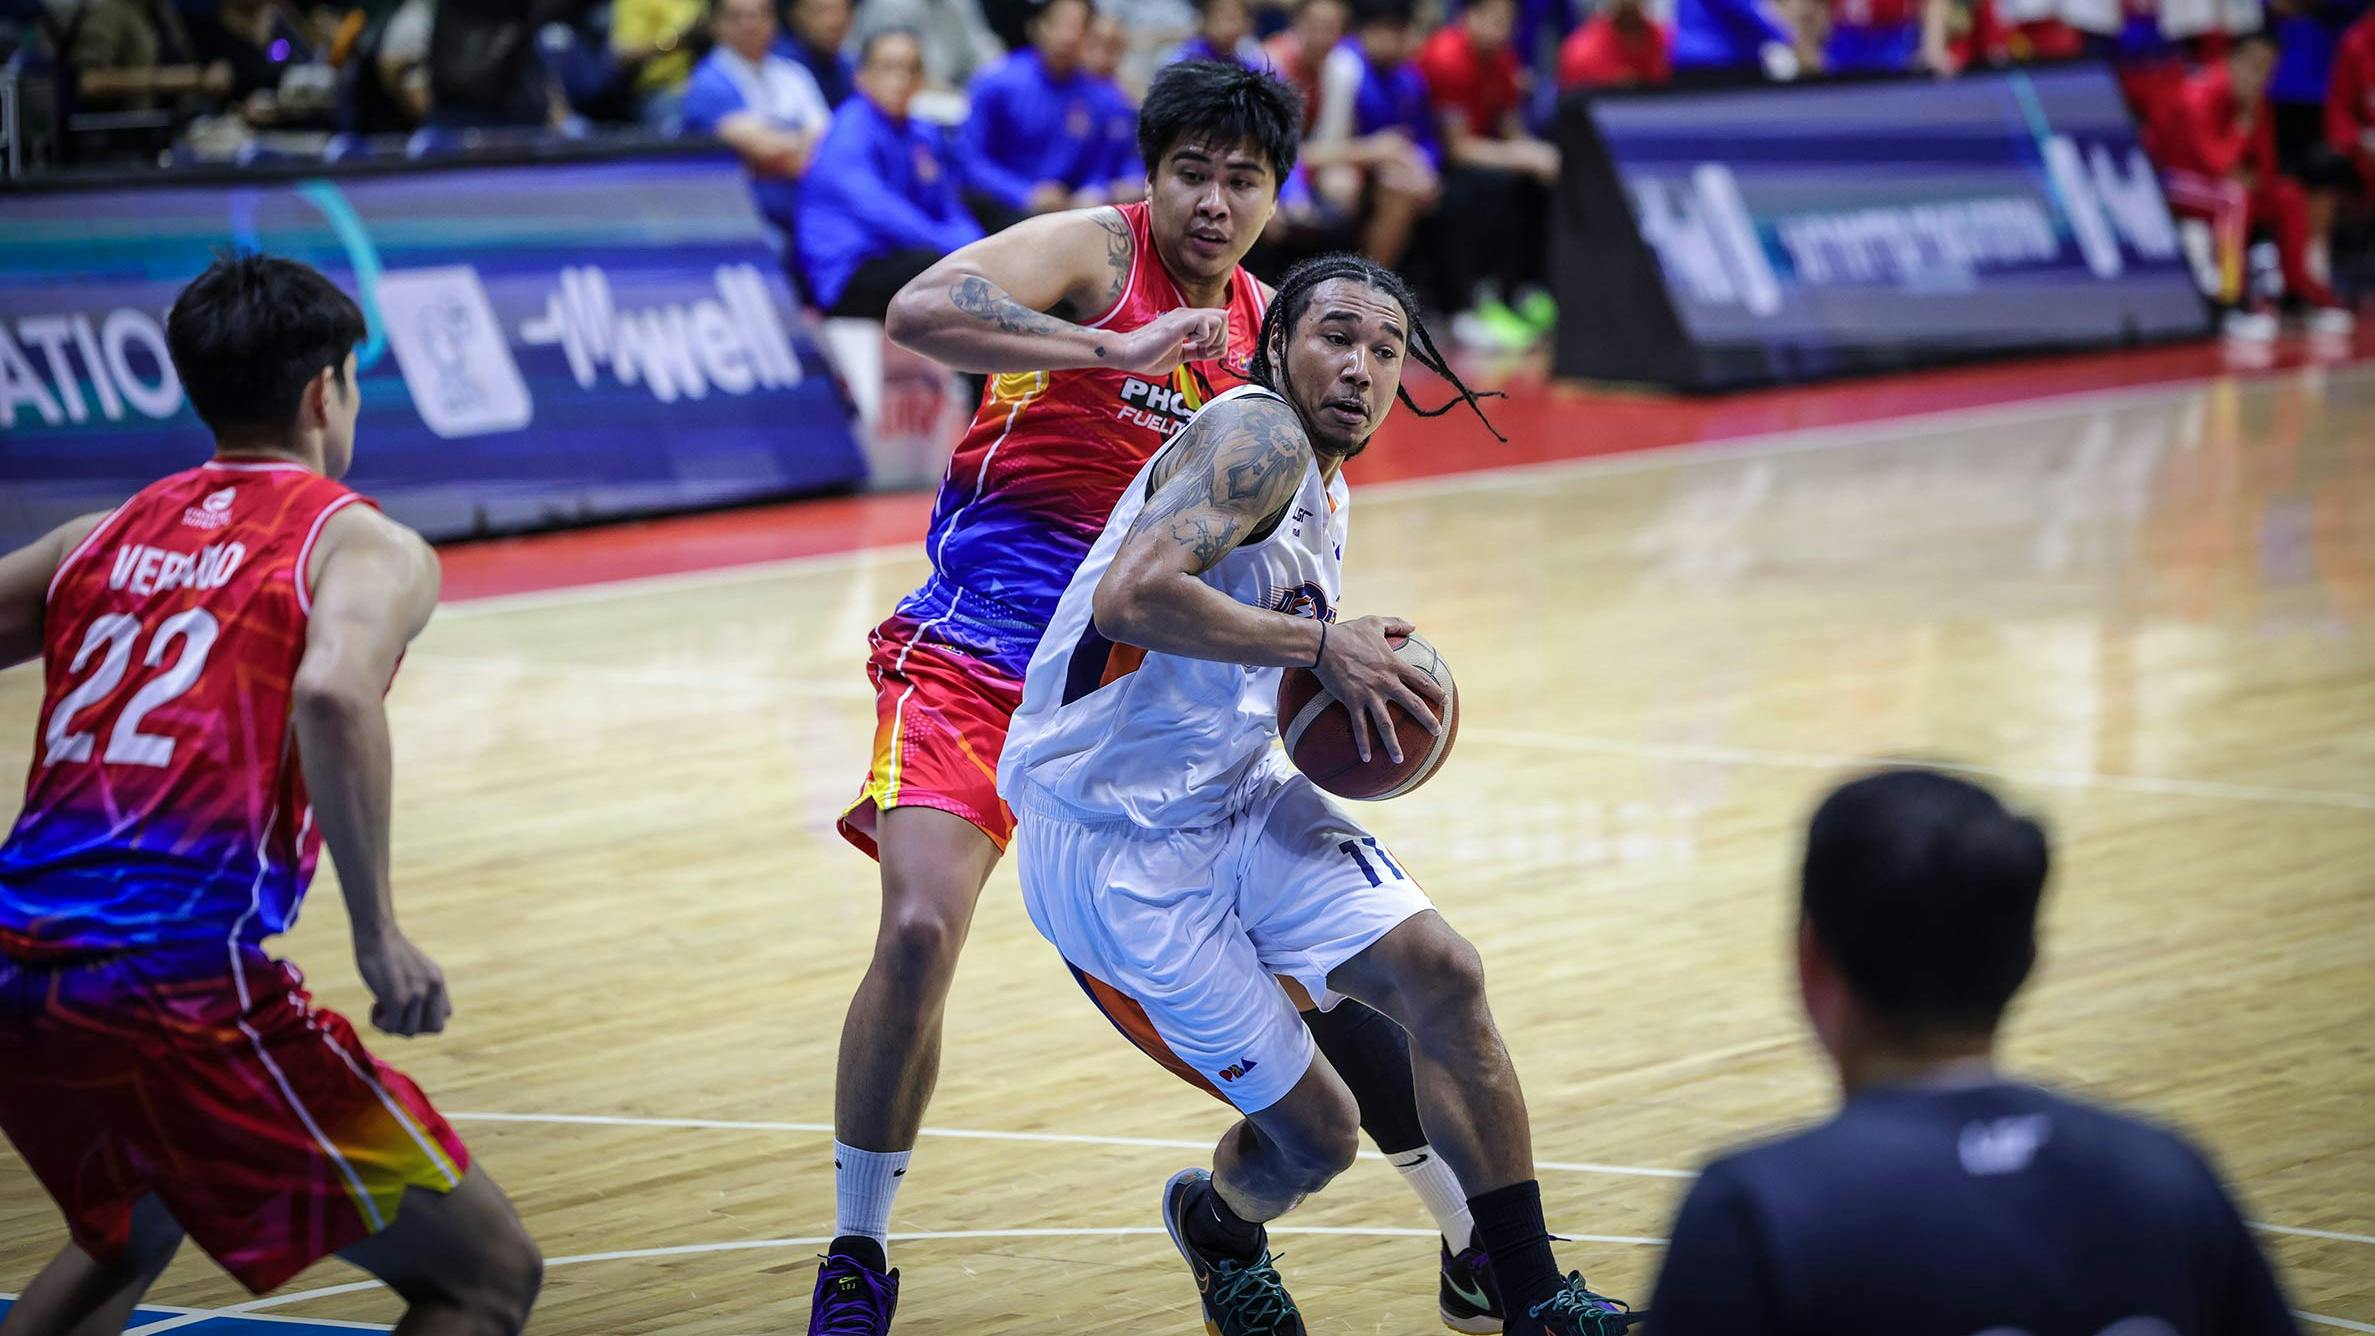 PBA: Chris Newsome allays knee injury concerns after collision with Javee Mocon